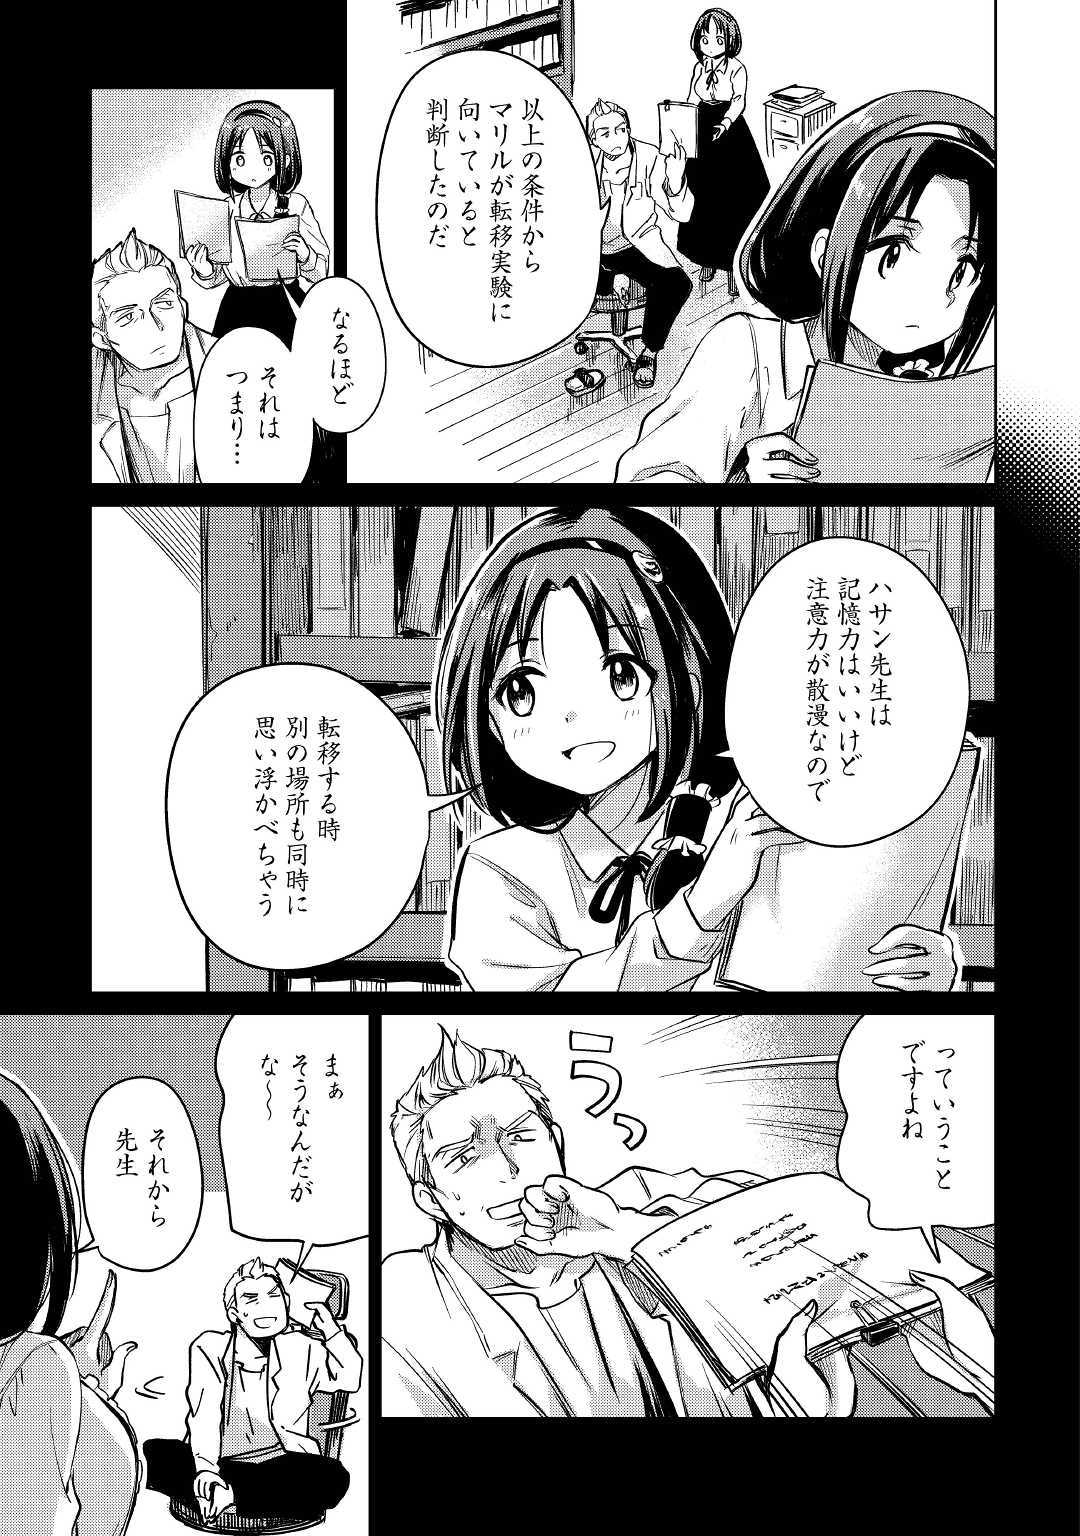 The Former Structural Researcher’s Story of Otherworldly Adventure 第22話 - Page 13